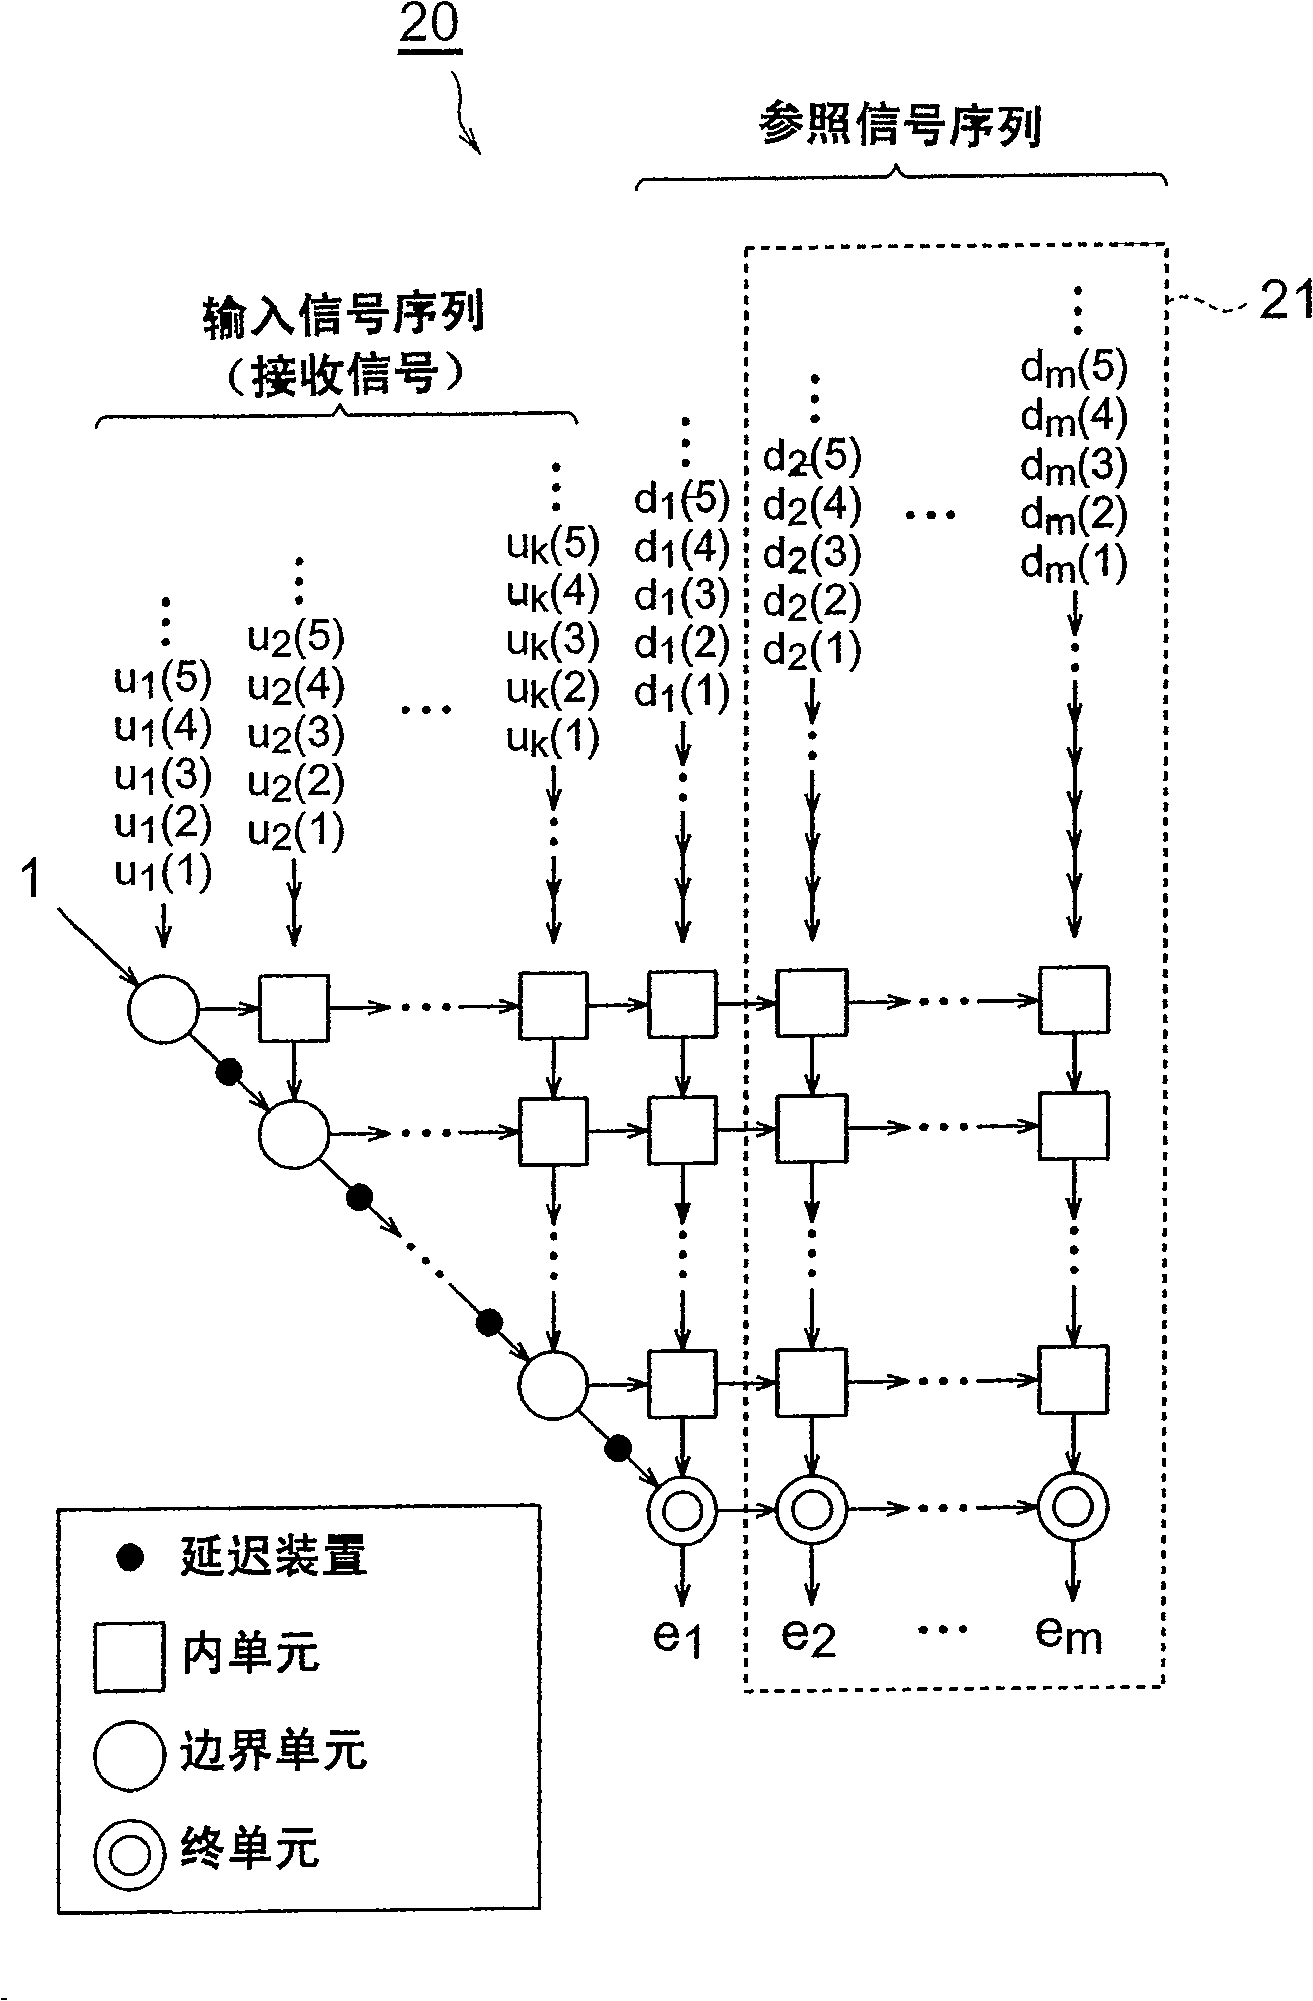 Sequential grating array device